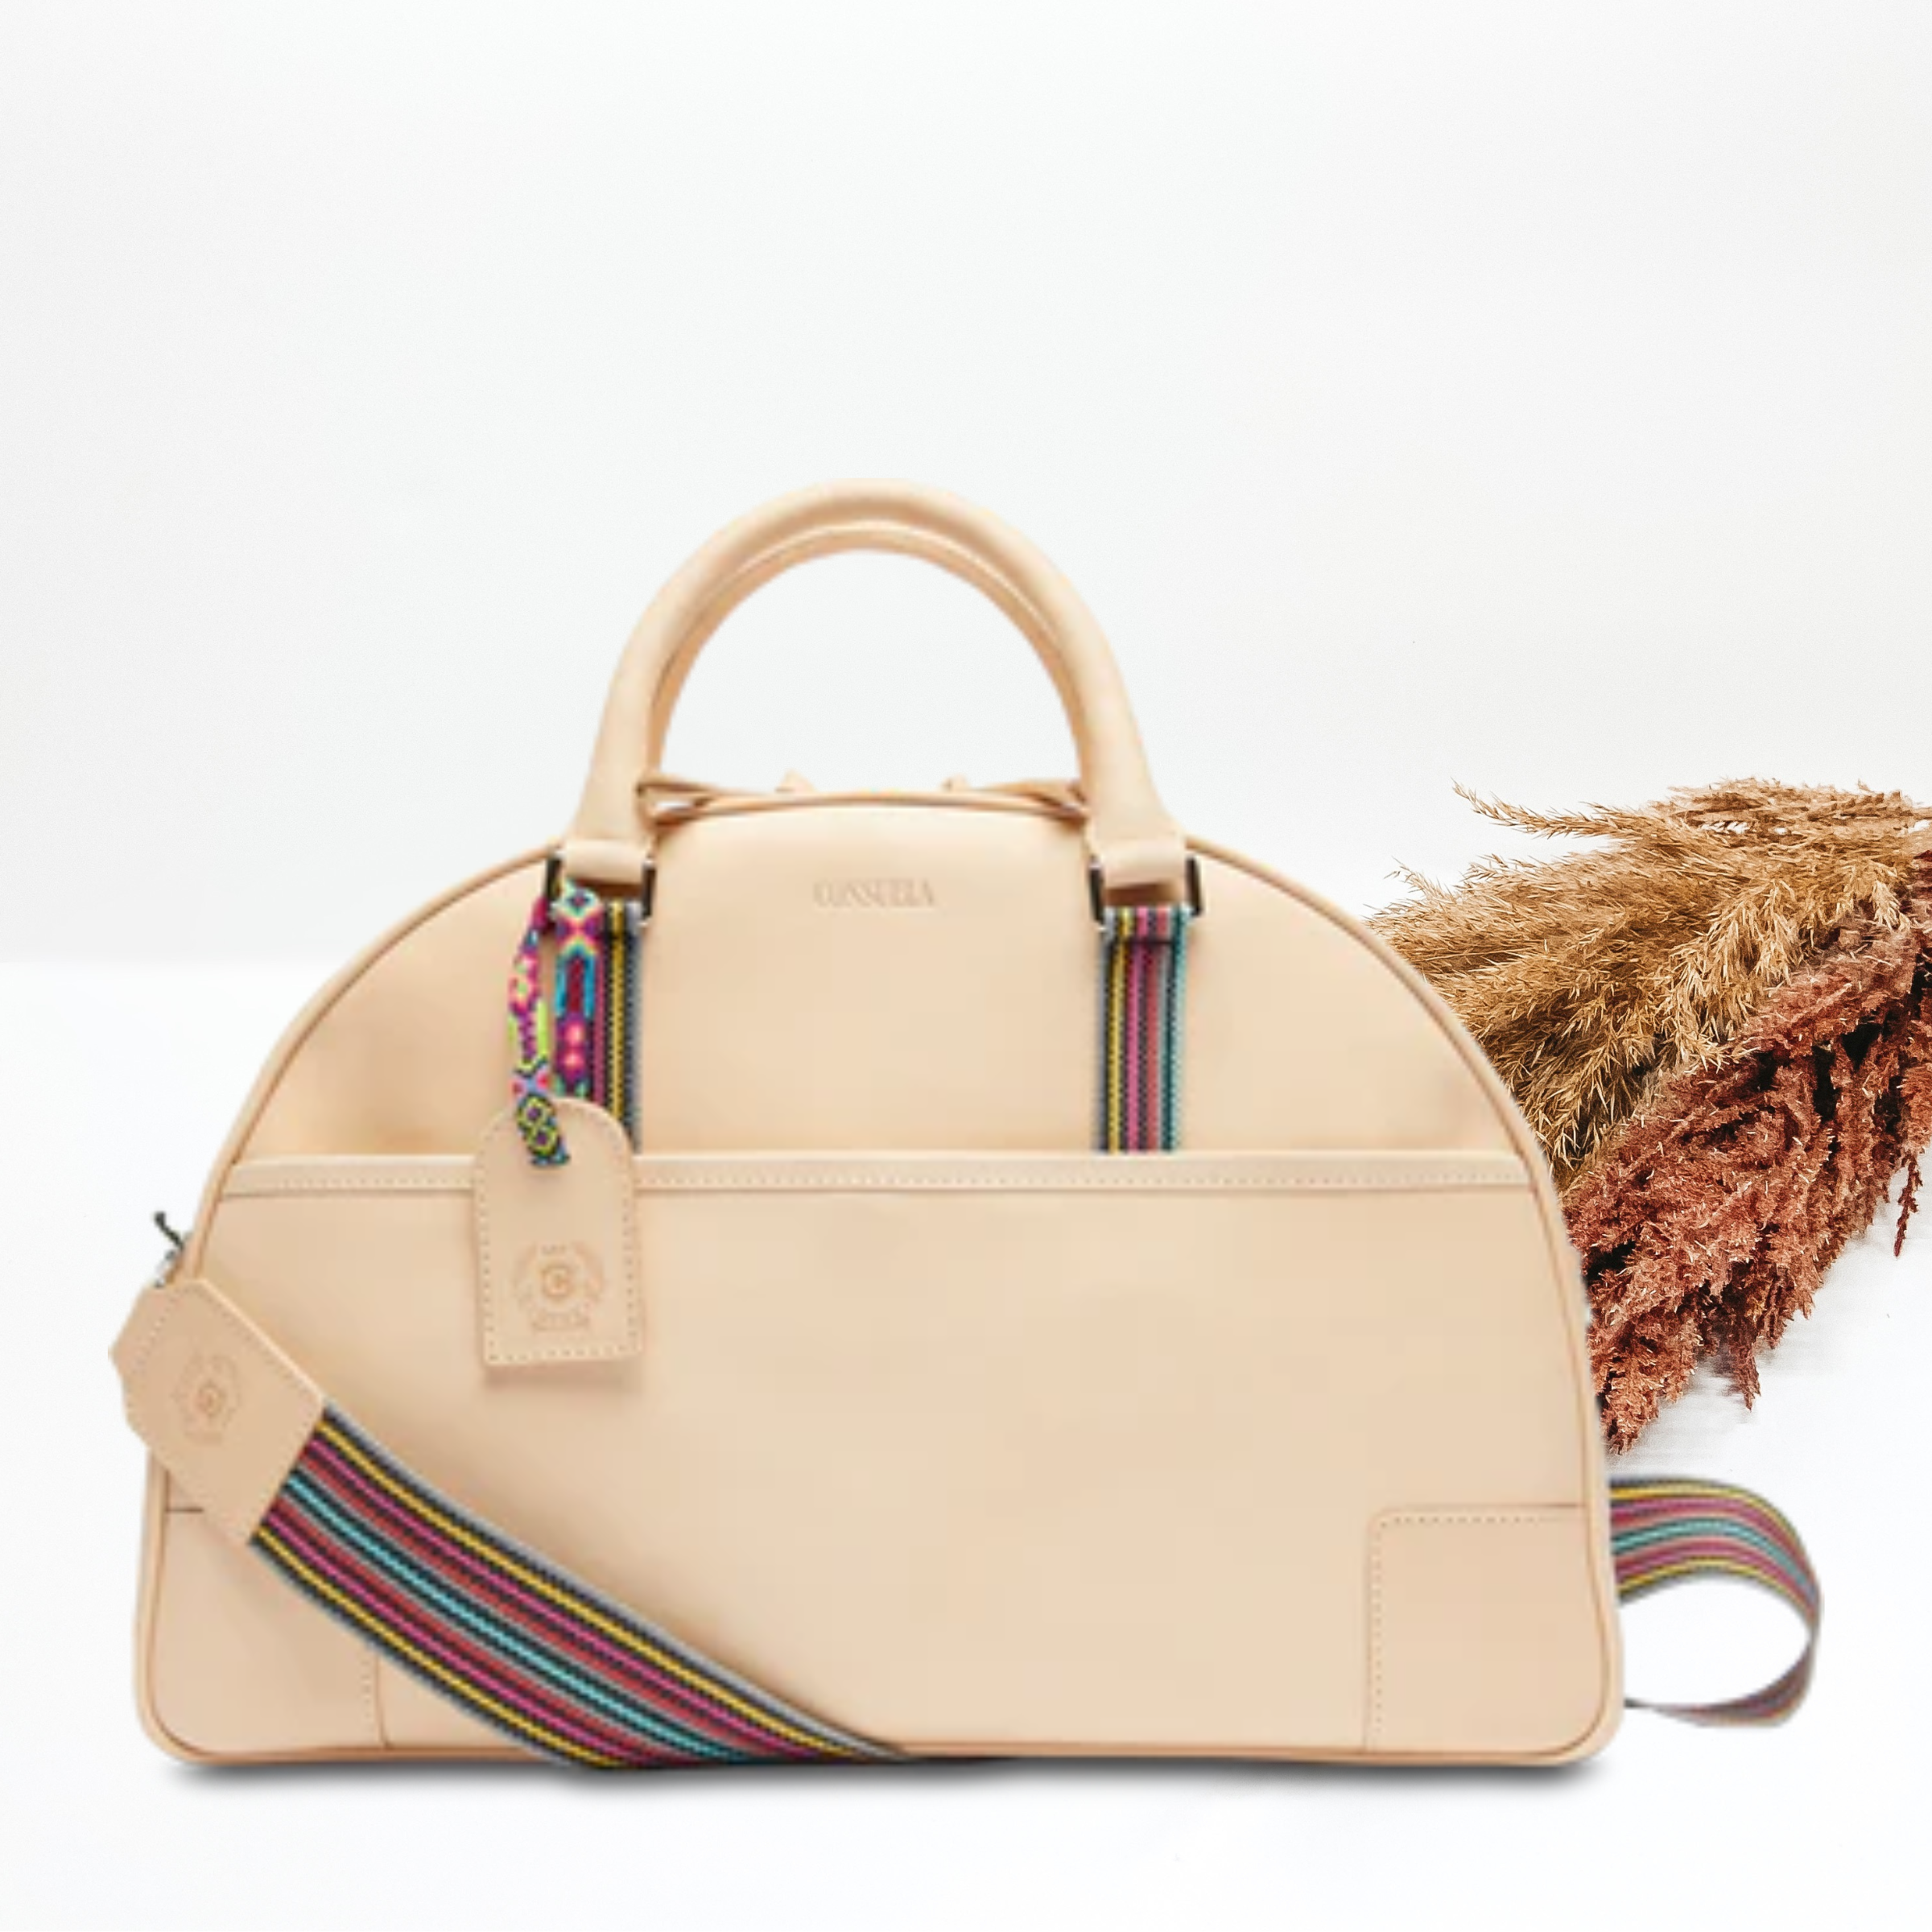 Pictured is a dome shaped bag with light tan short handles and a striped strap. This bag is a light tan leather with light tan accents and a charm on one of the handles. This bag is pictured on a white background with pompous grass on the right side of the bag.